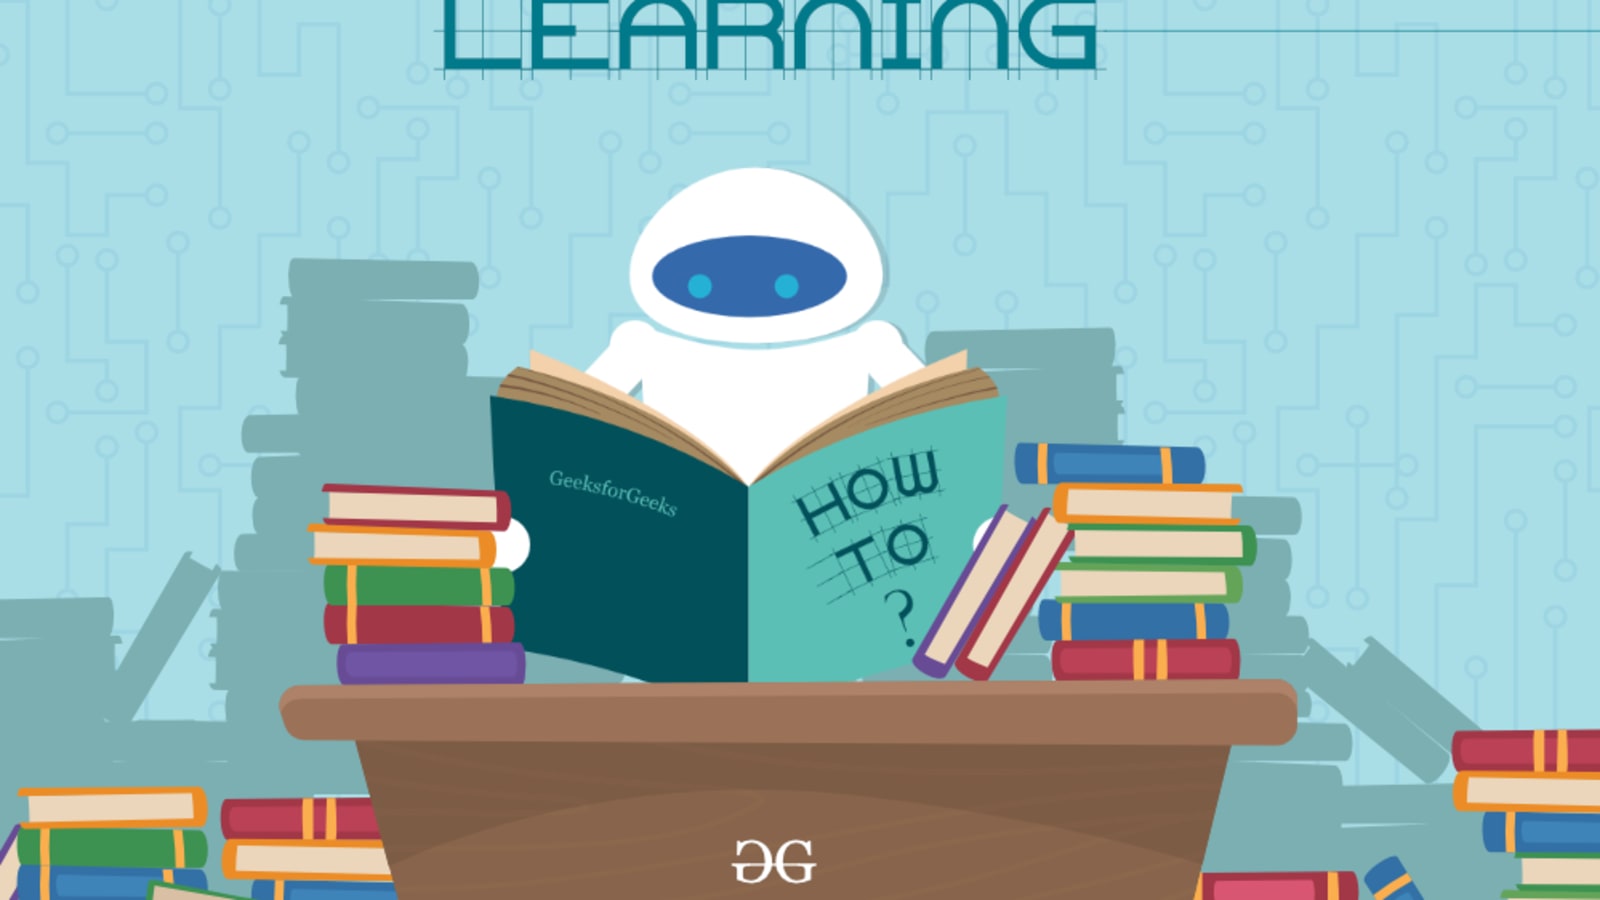 Cover Image For How To Learn Ml As A Software Developer - Library Management System Advantages , HD Wallpaper & Backgrounds